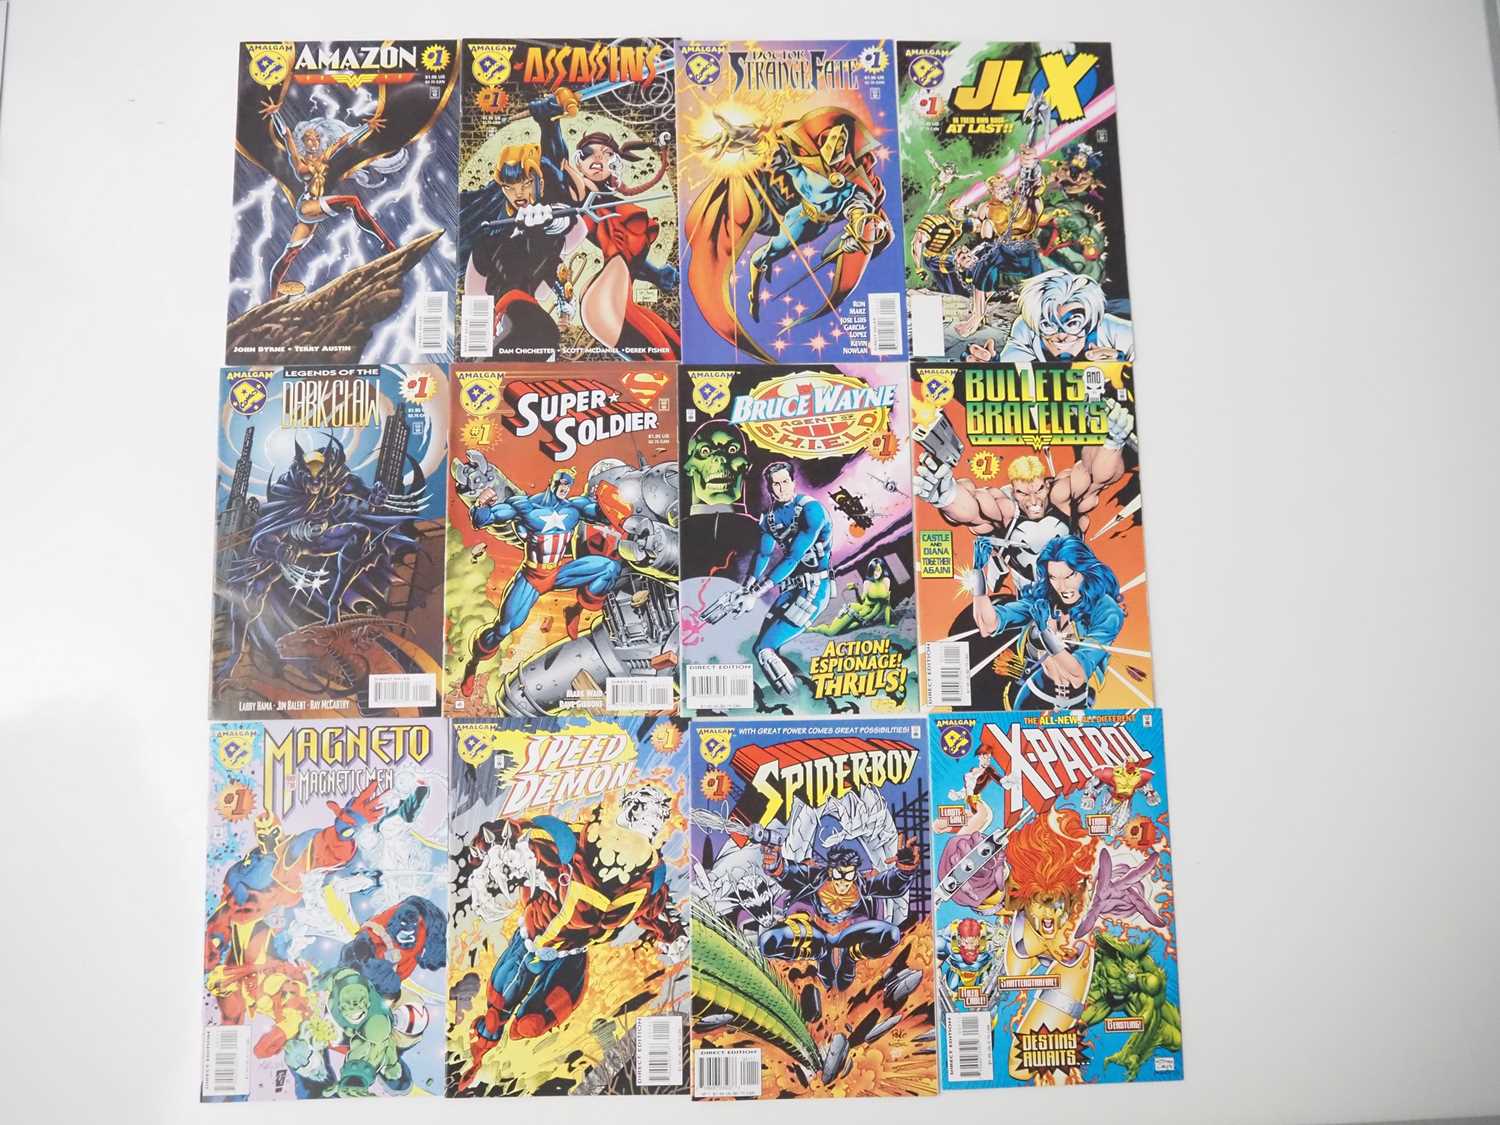 The Amalgam Age of Comics: The Marvel Collection | Slings & Arrows